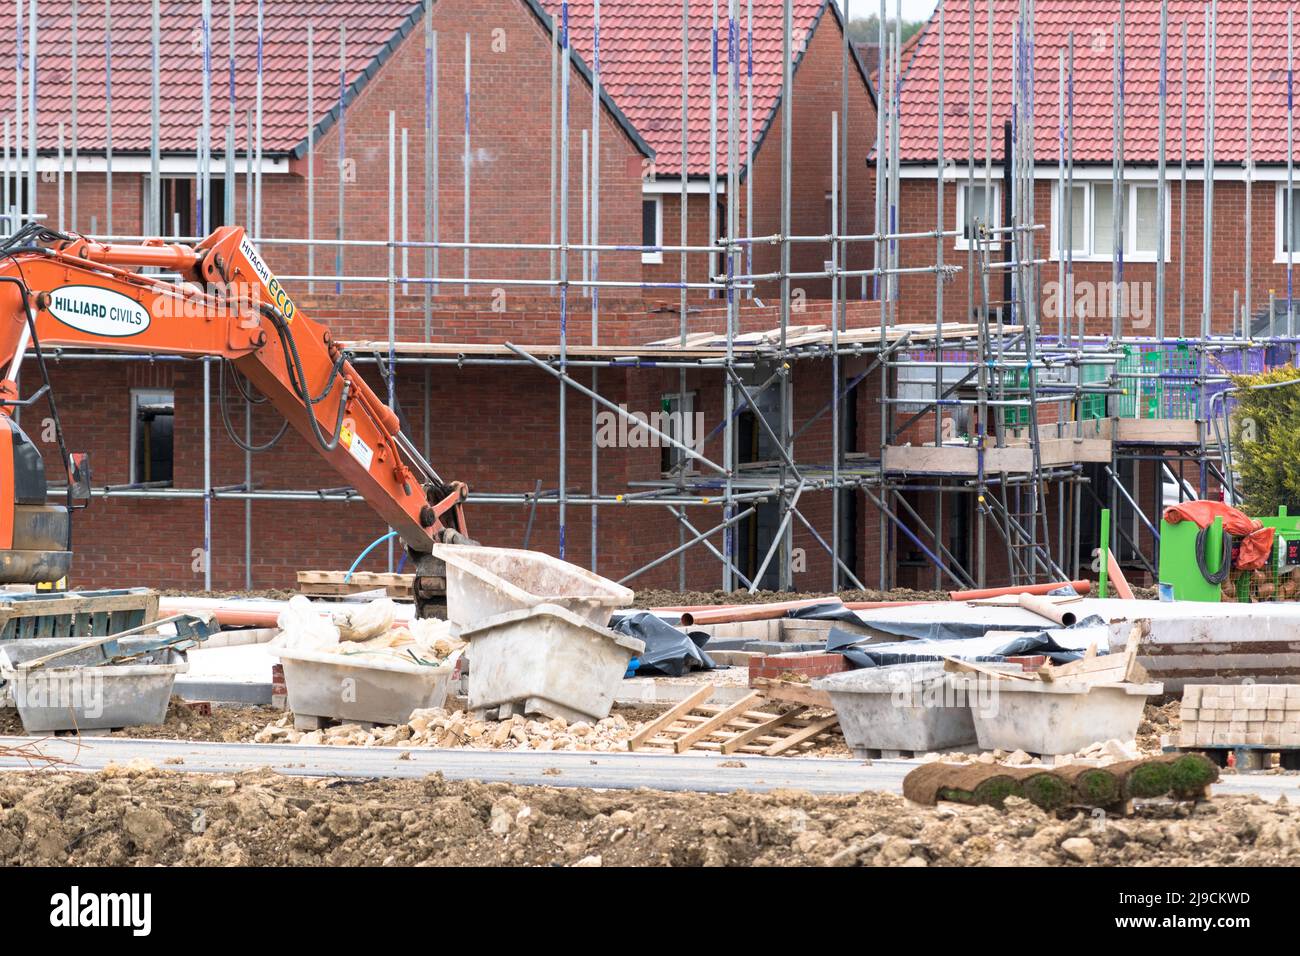 Construction - William Thorpe Fields New Homes Housing Development in  Holmewood North East Derbyshire Stock Photo